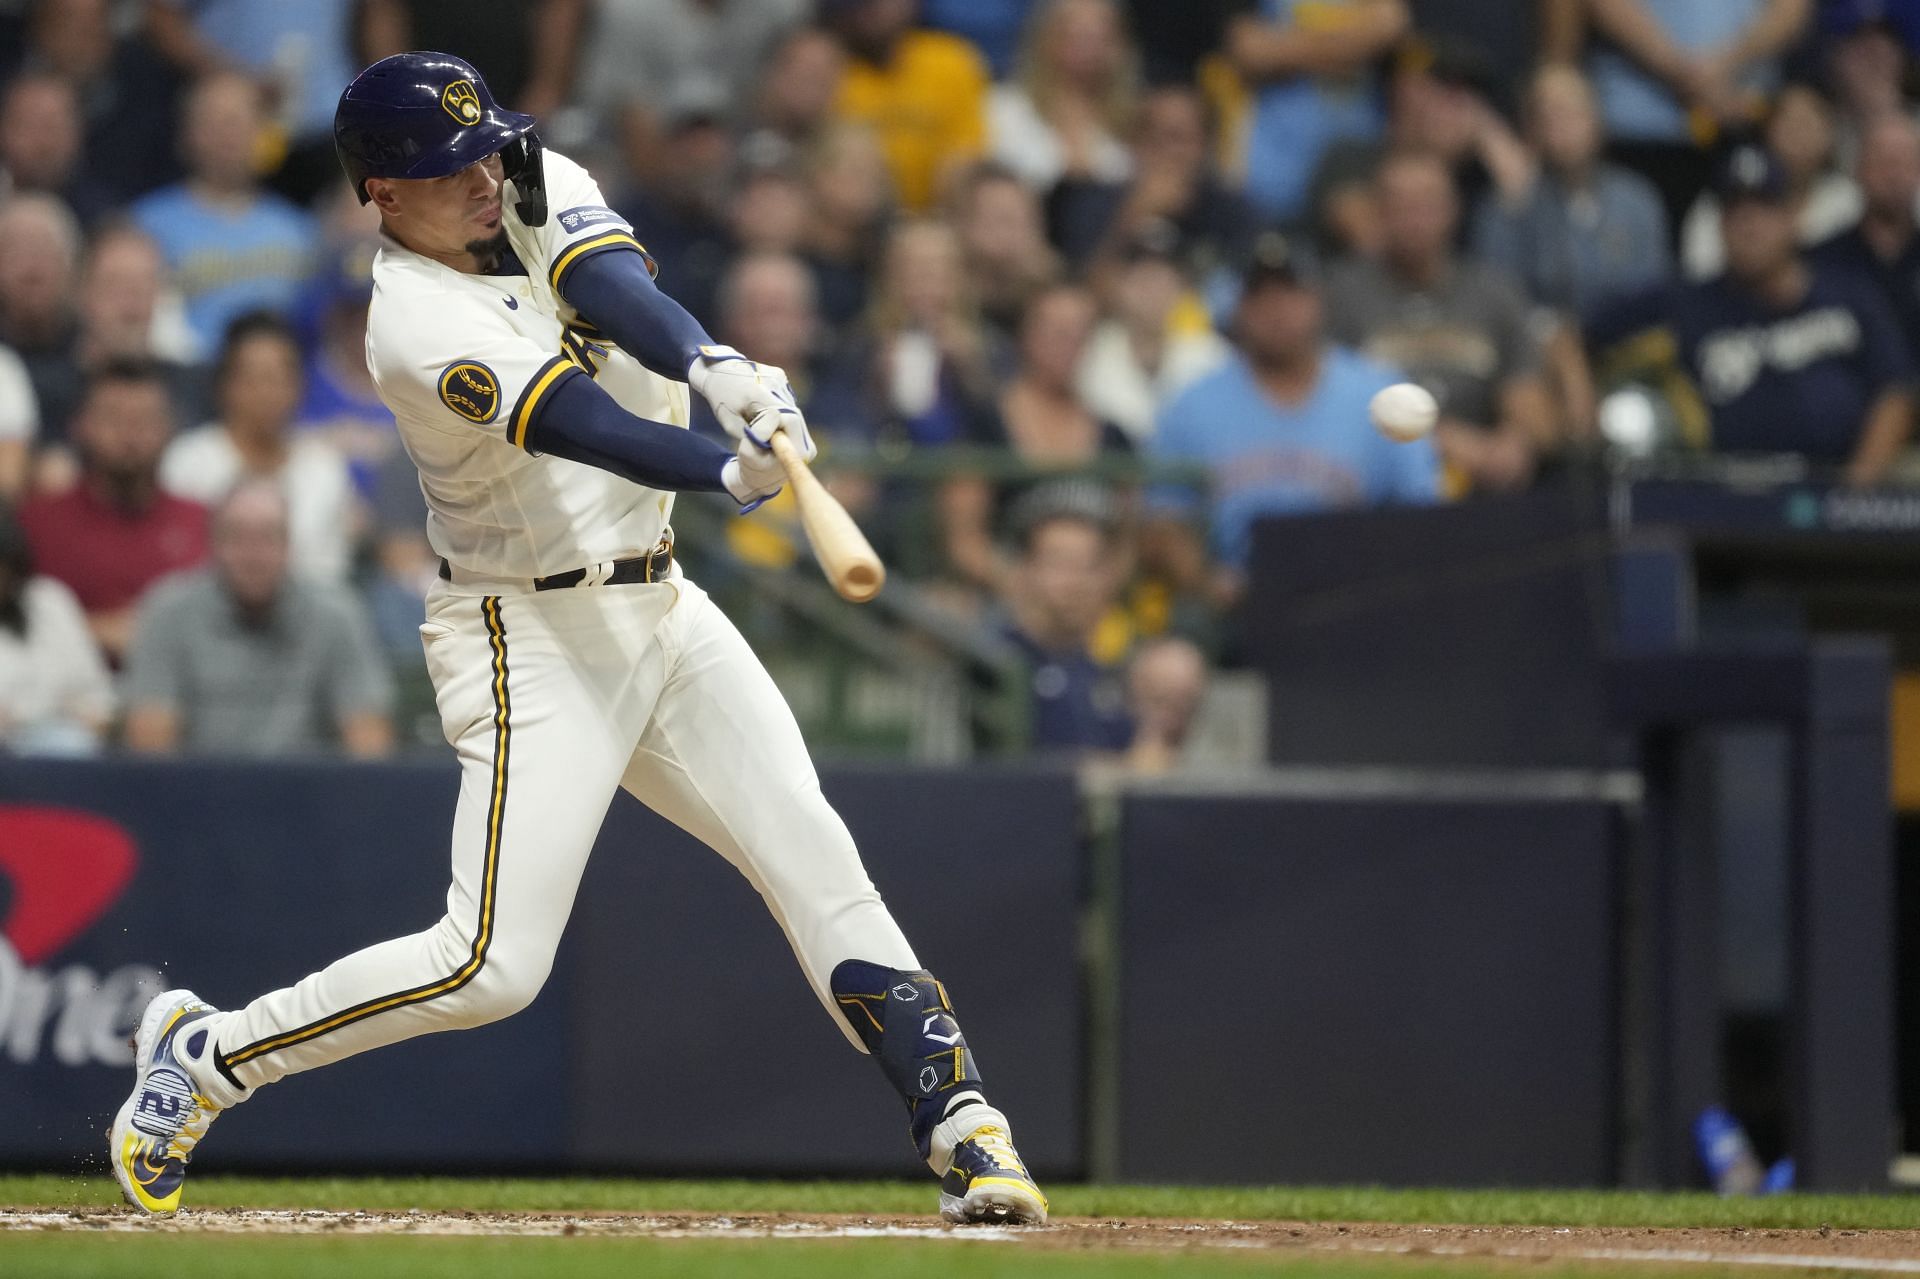 The Los Angeles Dodgers&rsquo; interest in Willy Adames has reignited following Gavin Lux&rsquo;s poor performance this spring training.